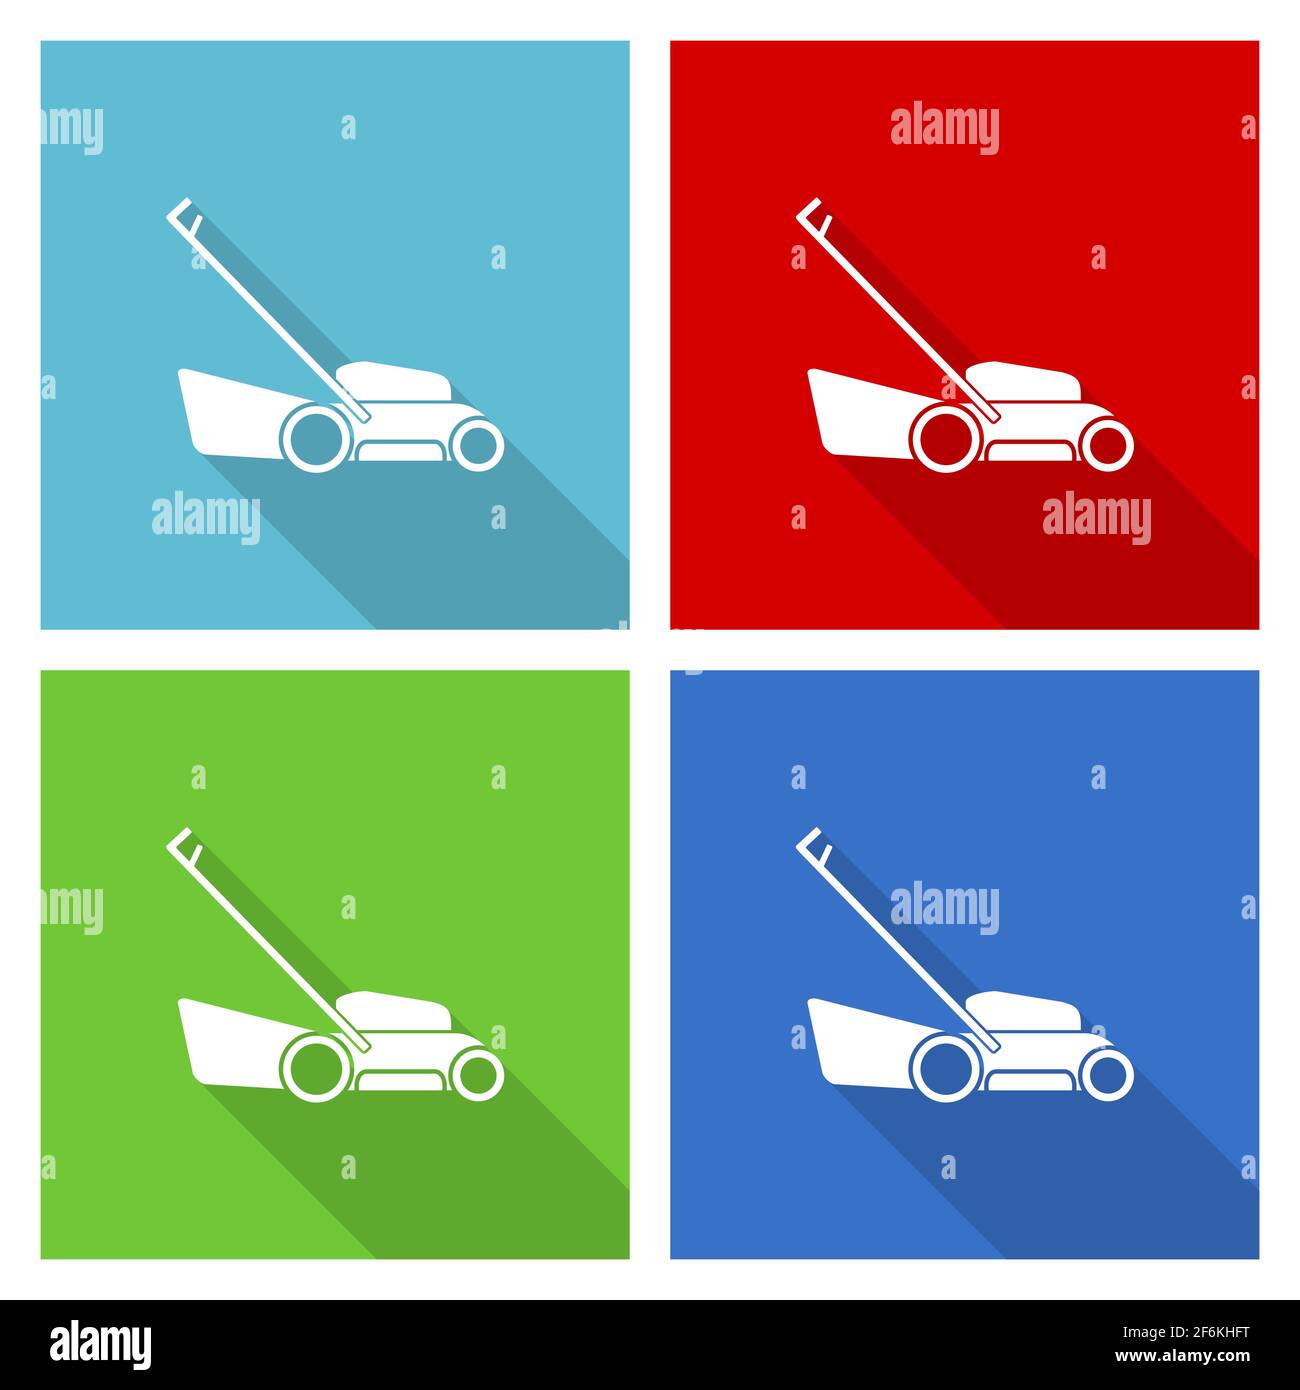 Lawn mower icon set, flat design vector illustration in eps 10 for webdesign and mobile applications in four color options Stock Vector